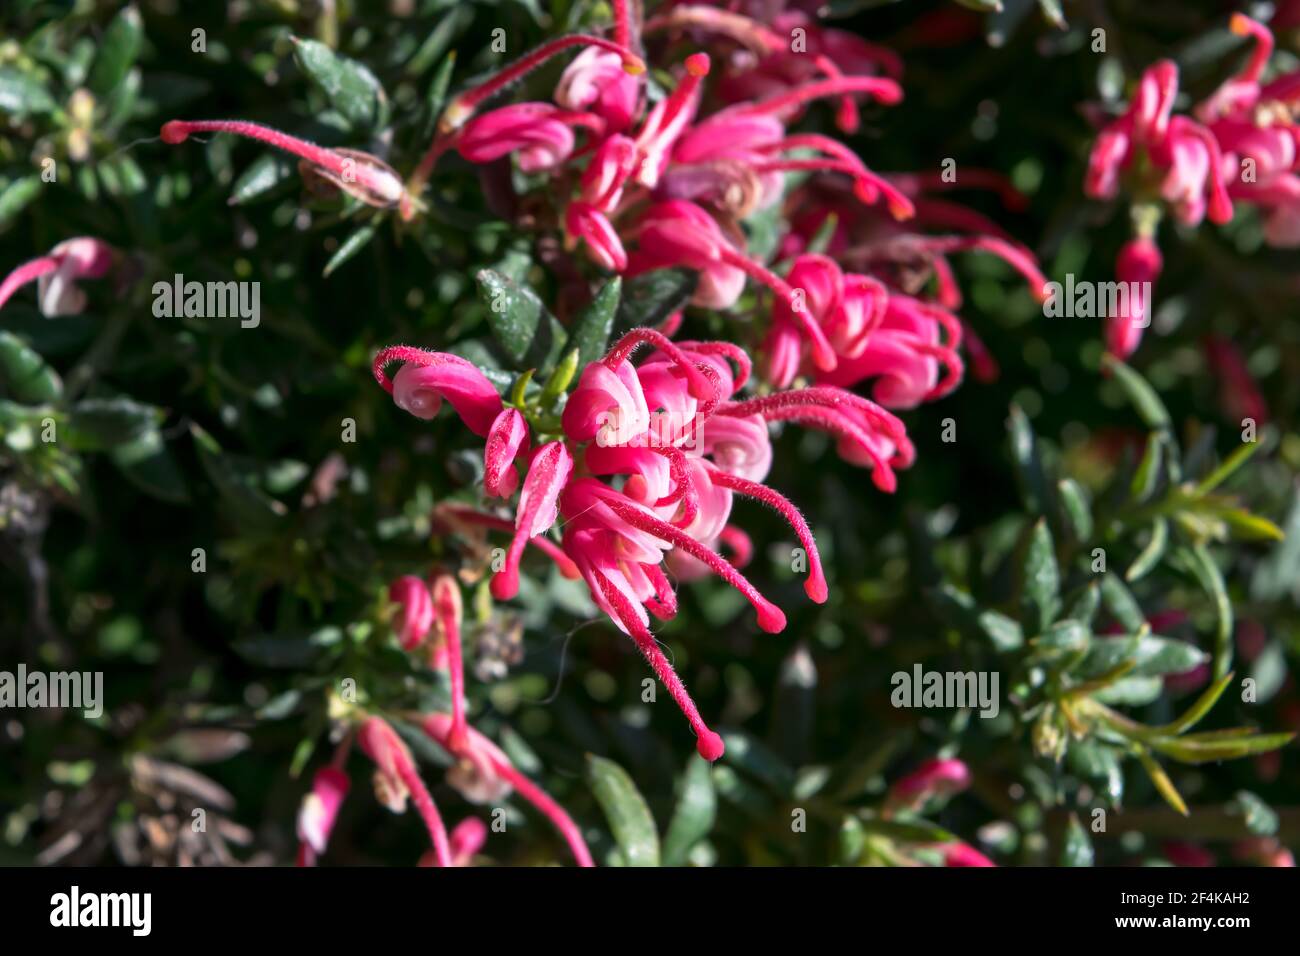 Close-up of a wonderful plant of Justicia carnea, with its characteristic colorful flowers. Stock Photo